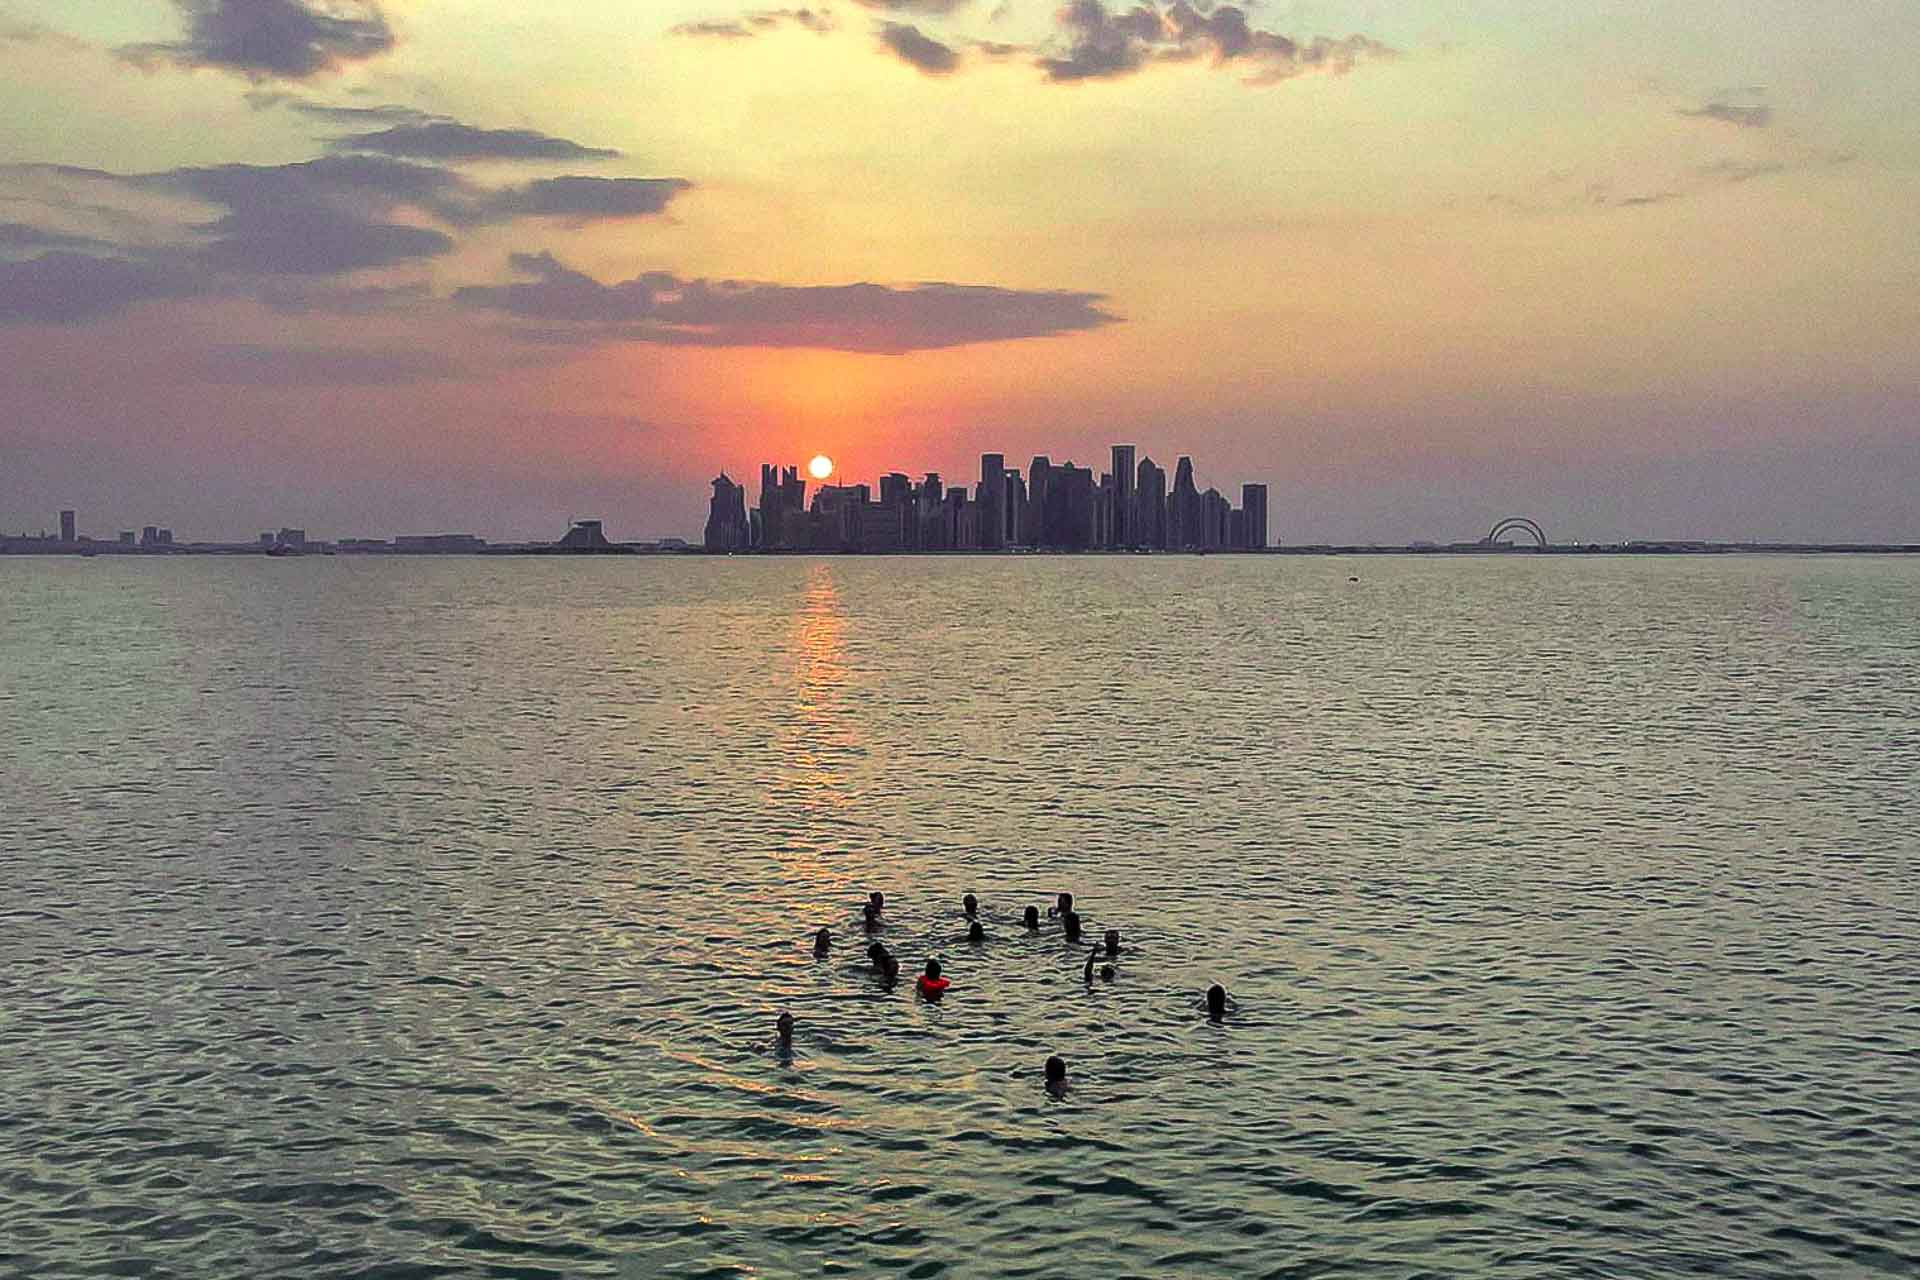 view from people in the water with many large building far in the background and the sun setting in between them